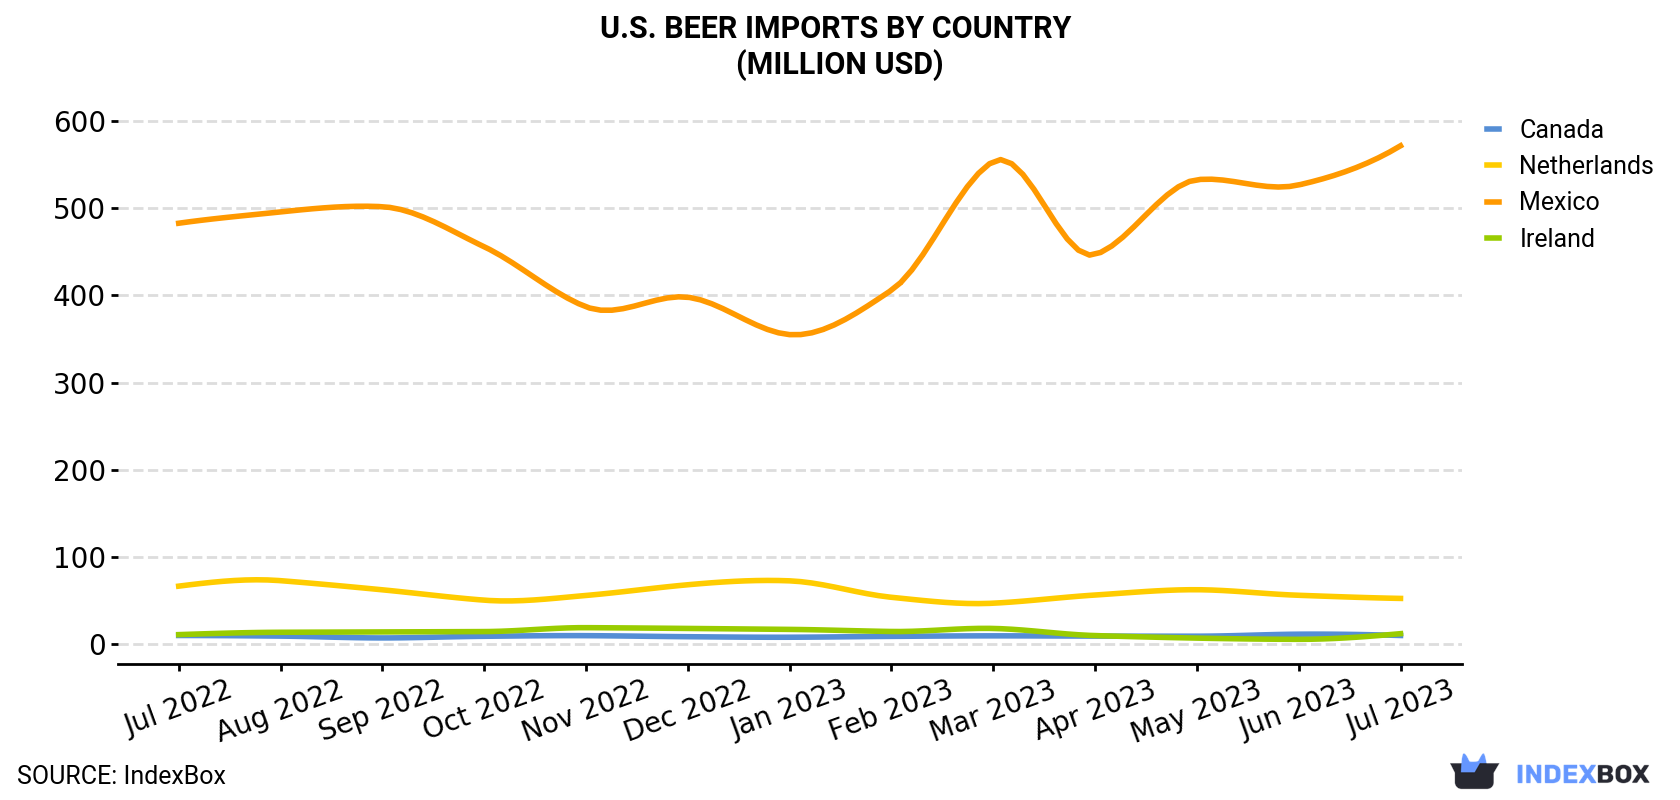 U.S. Beer Imports By Country (Million USD)